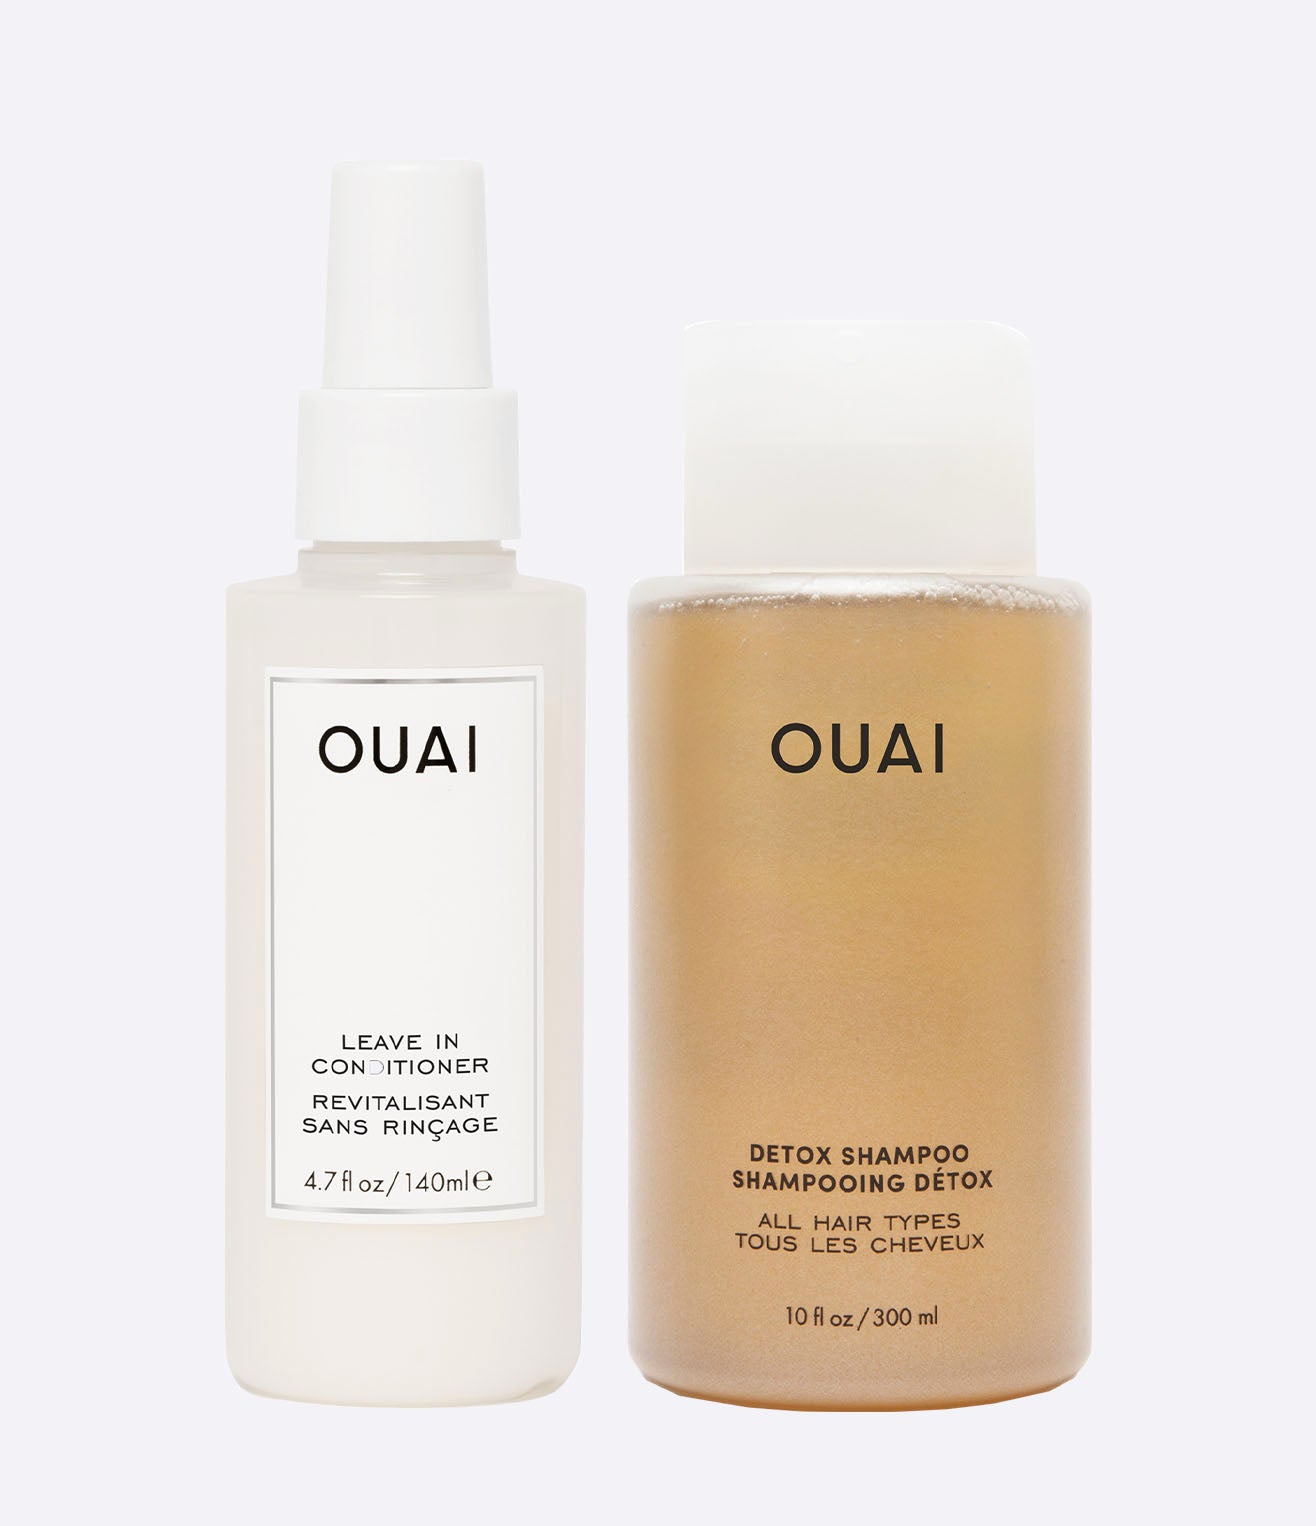 Ouai Better Together Shampoo & Leave In Conditioner – OUAI